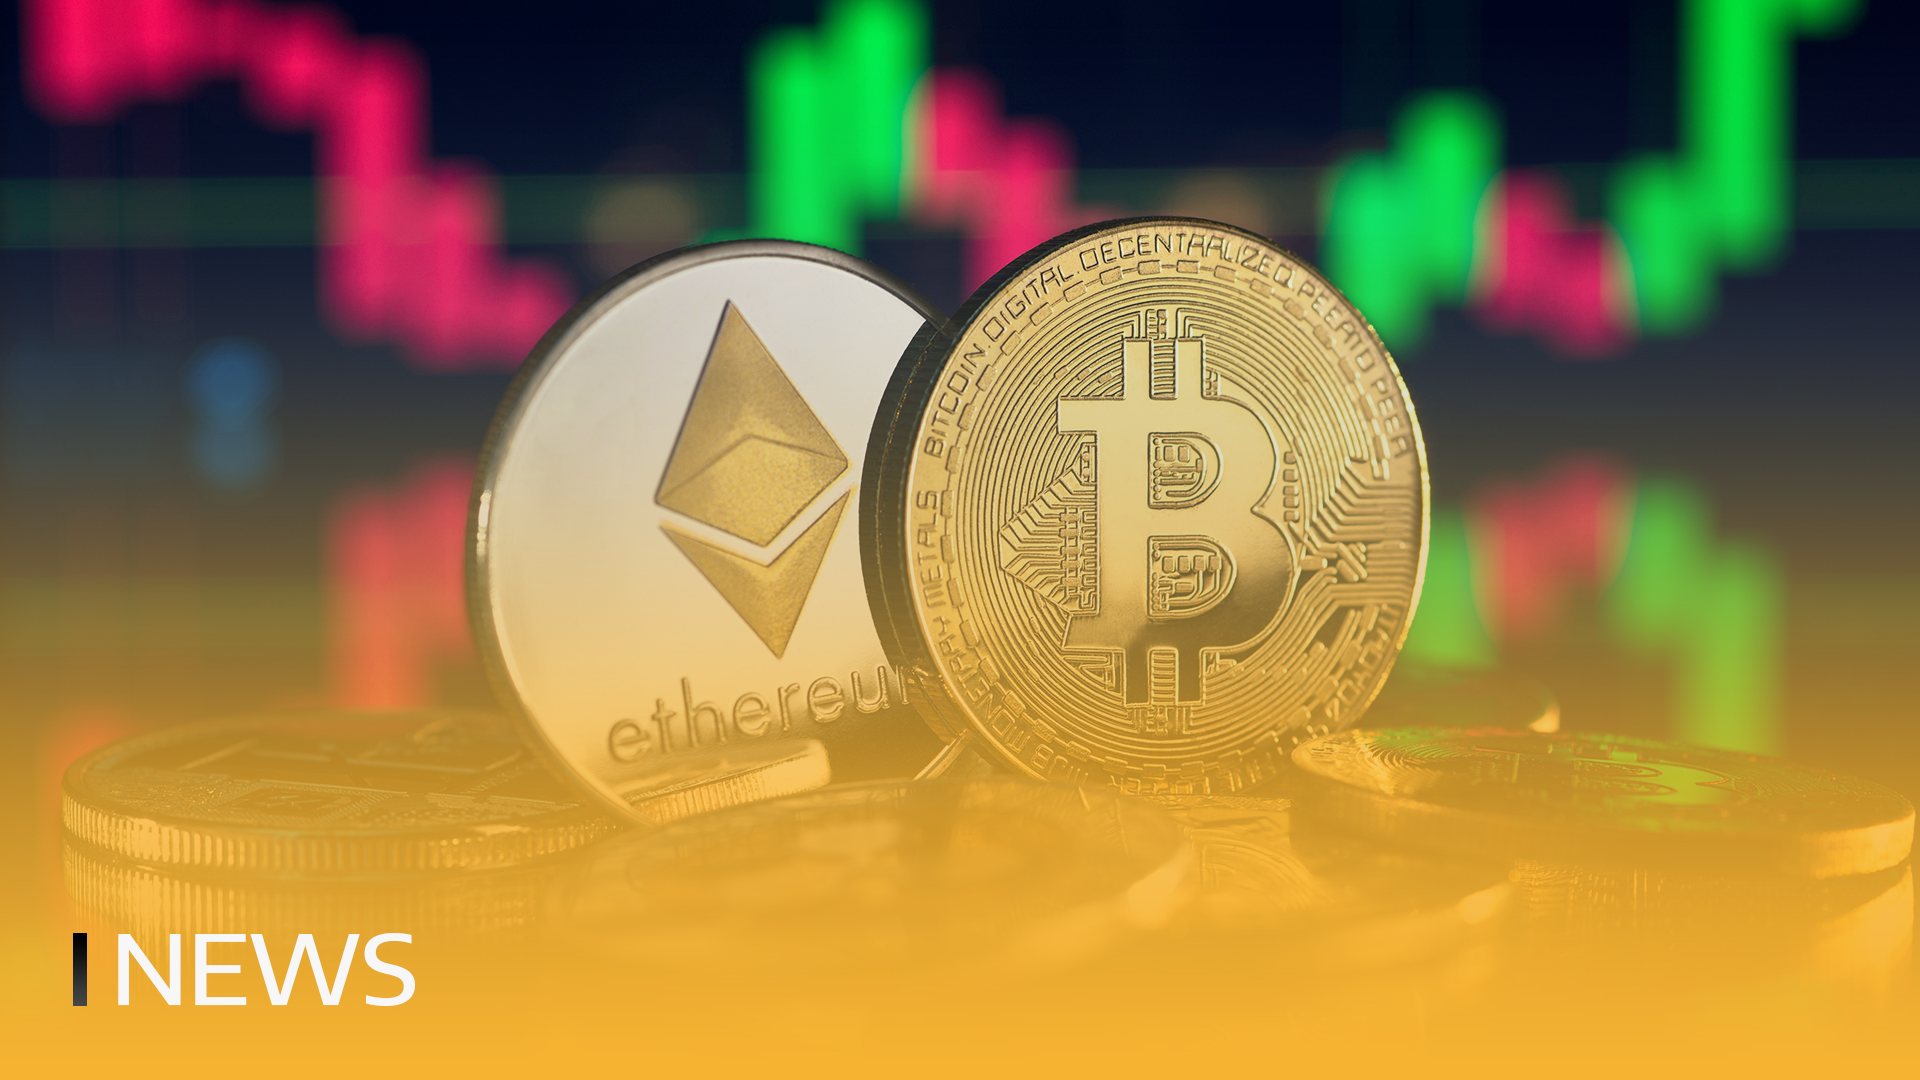 Ethereum Τιμή έναντι Bitcoin χτυπά 3 χρόνια χαμηλό